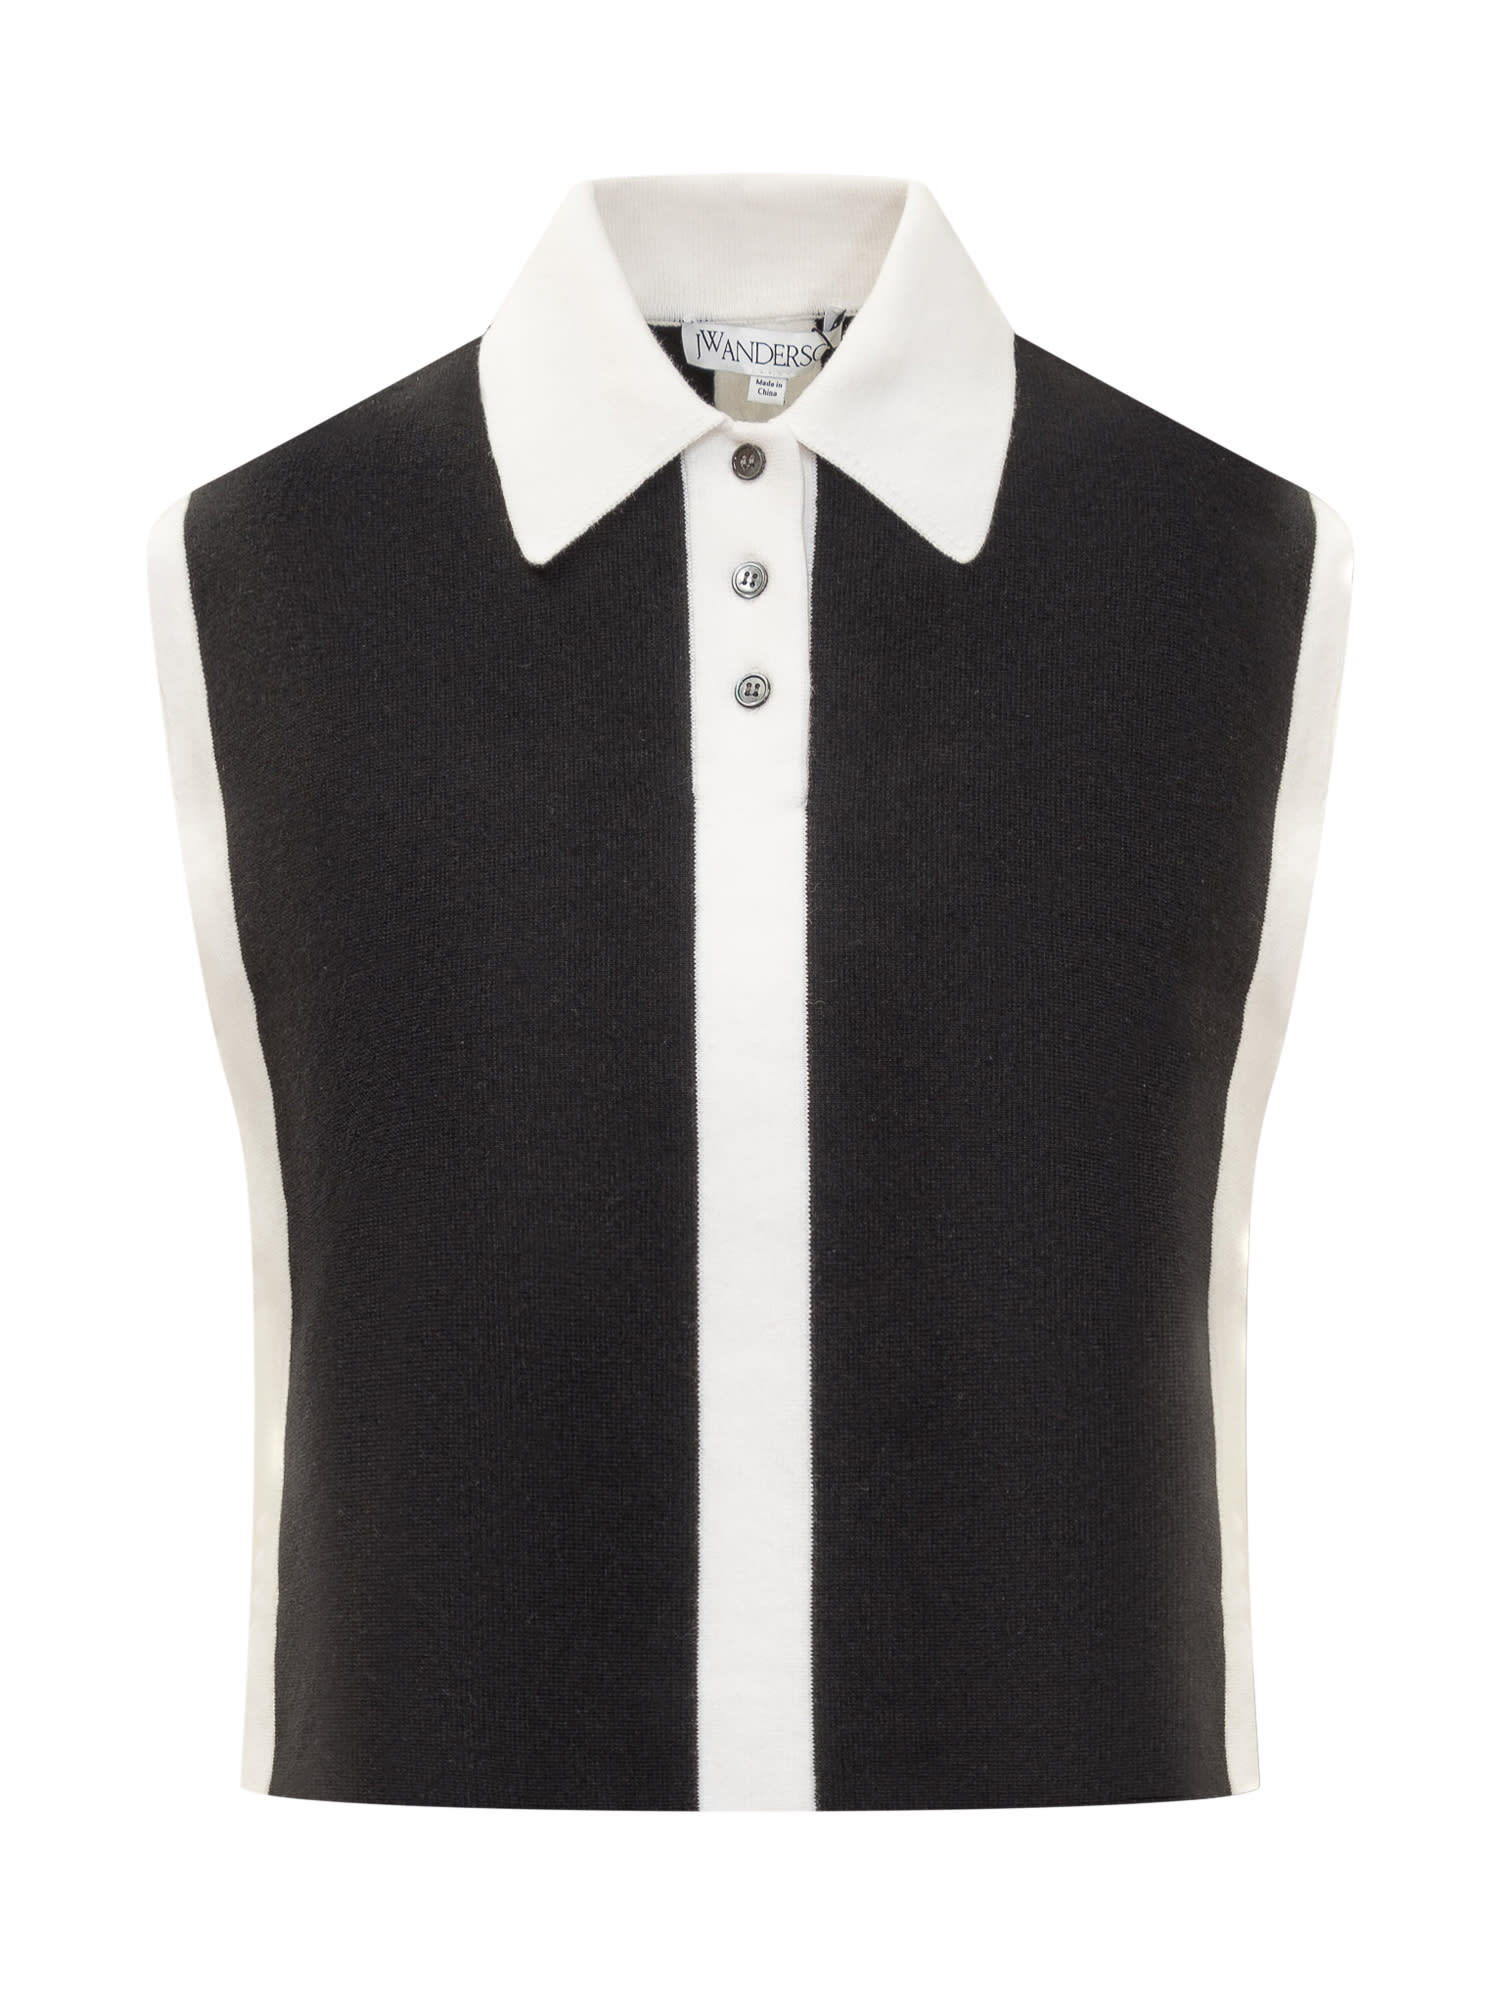 JW ANDERSON LAYERED CONTRAST POLO